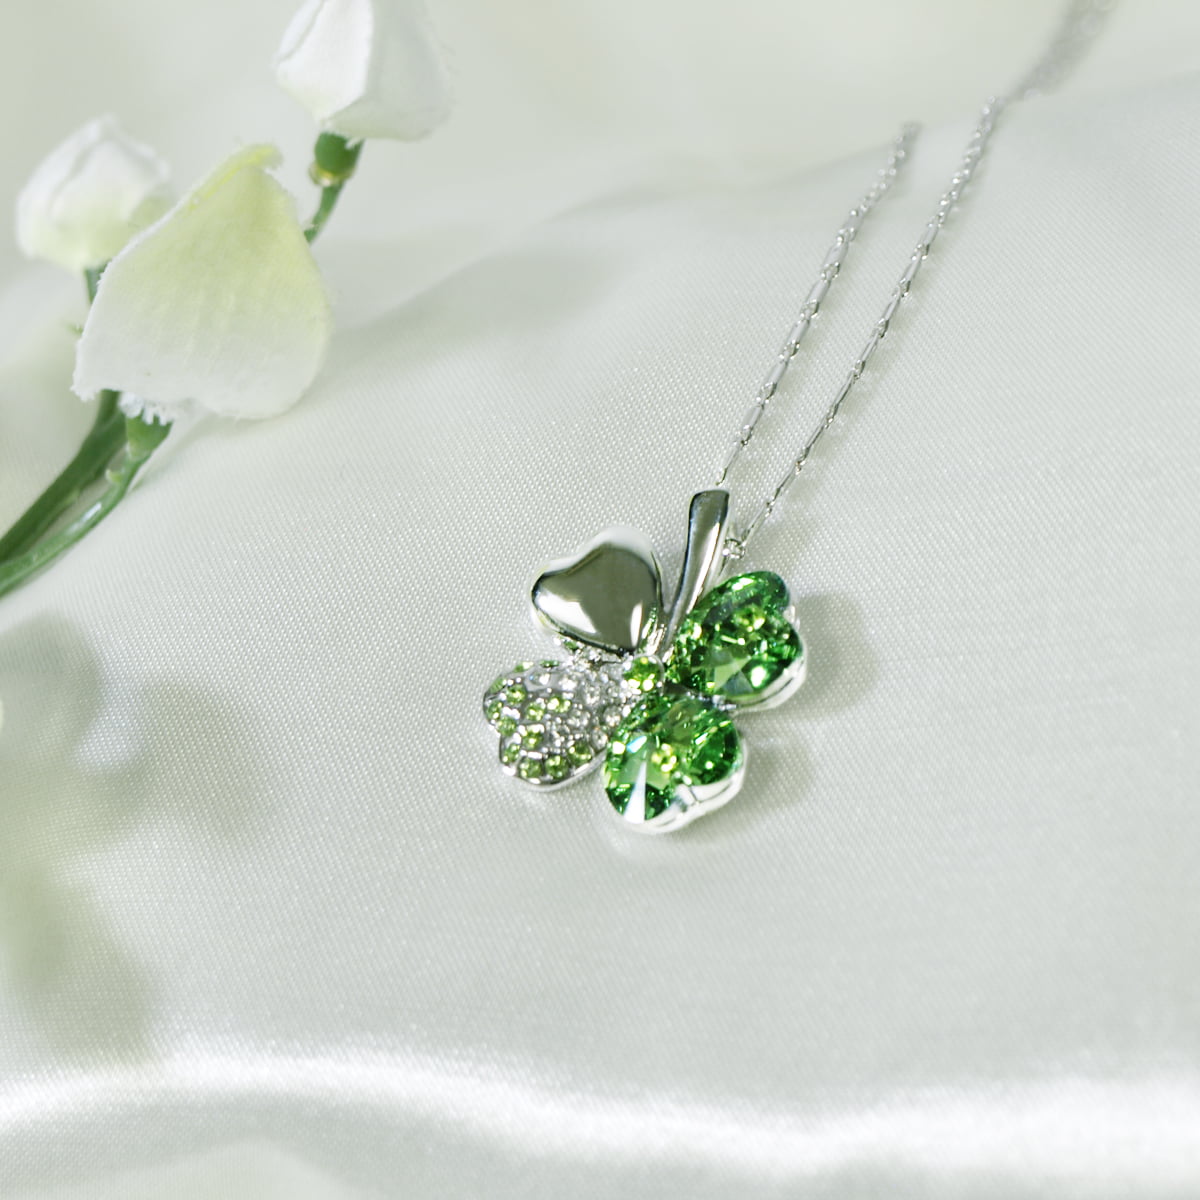 Used]Swarovski better clover necklace 36cm - 42cm Good Condition RY2186 -  BE FORWARD Store